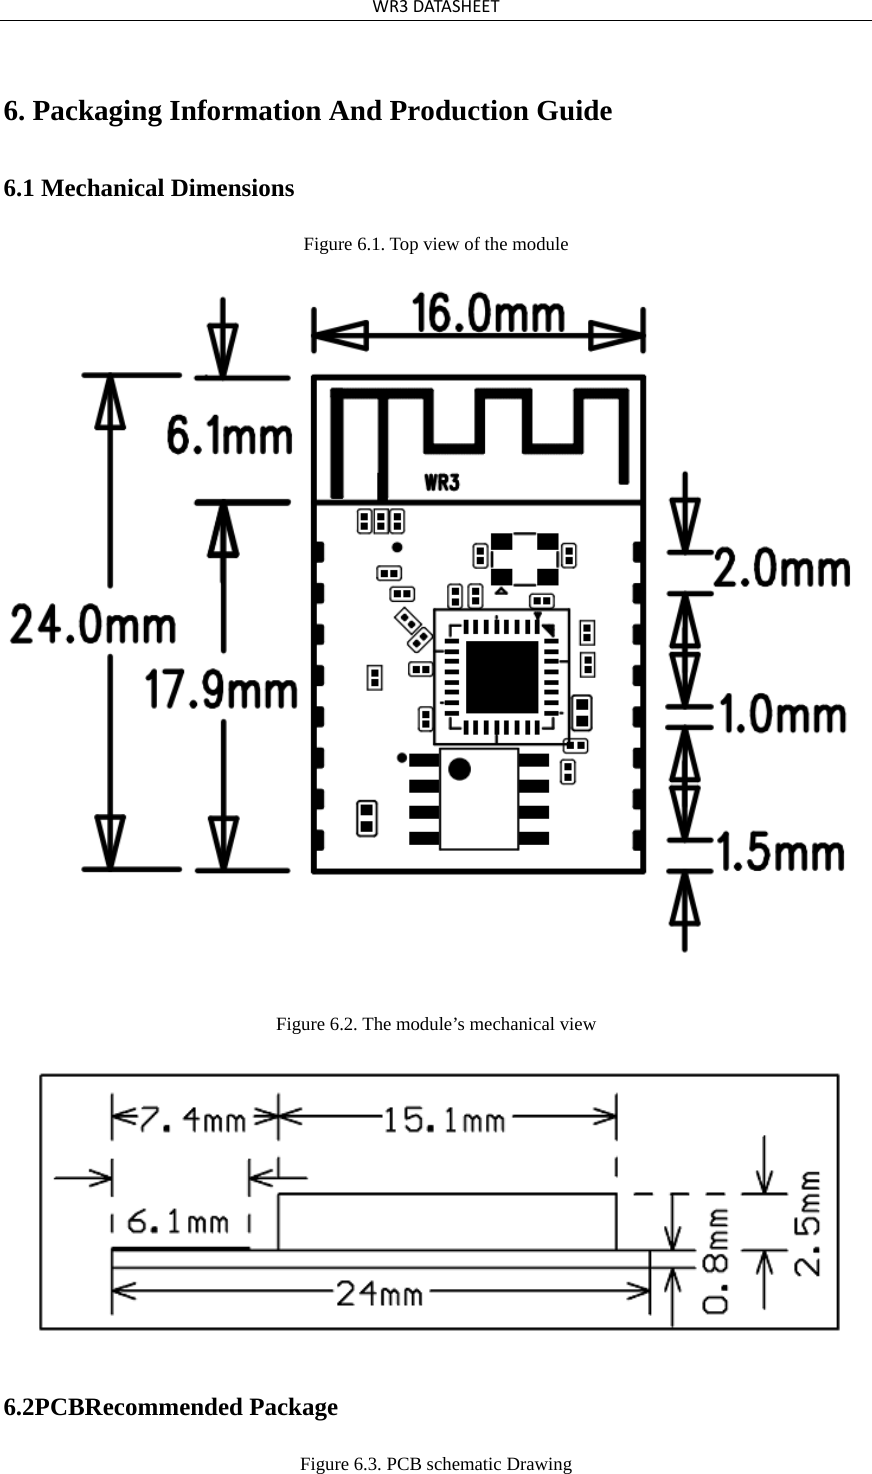 WR3DATASHEET6. Packaging Information And Production Guide 6.1 Mechanical Dimensions Figure 6.1. Top view of the module Figure 6.2. The module’s mechanical view 6.2PCBRecommended Package Figure 6.3. PCB schematic Drawing 